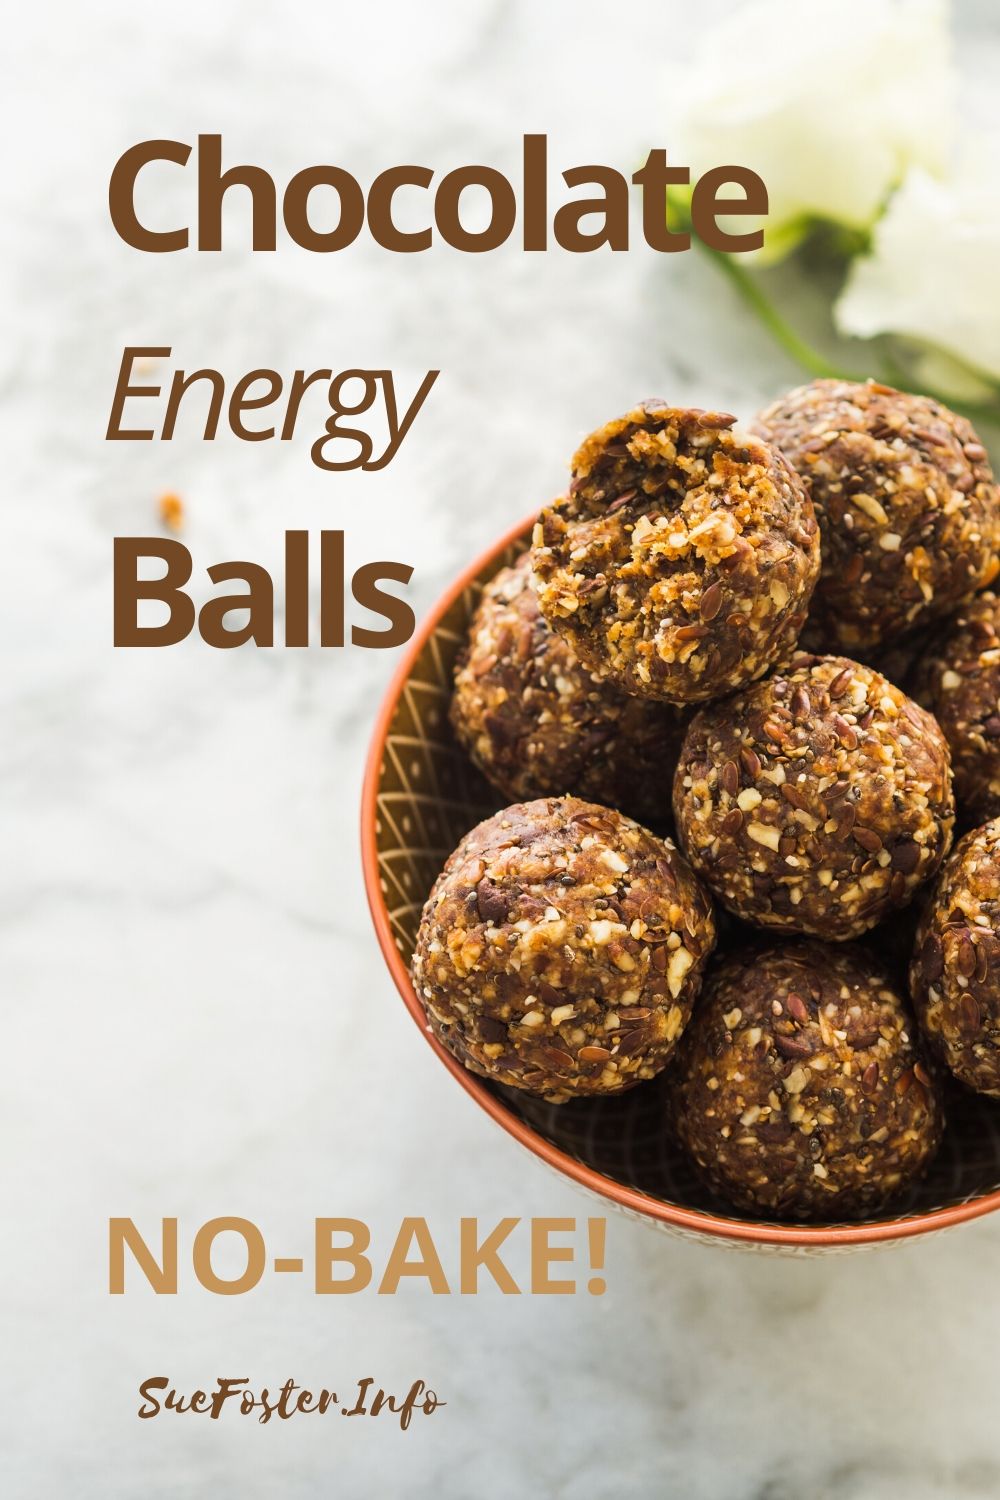 A super simple and quick no-bake recipe to make healthy chocolate energy balls, great for a quick snack and a burst of energy.